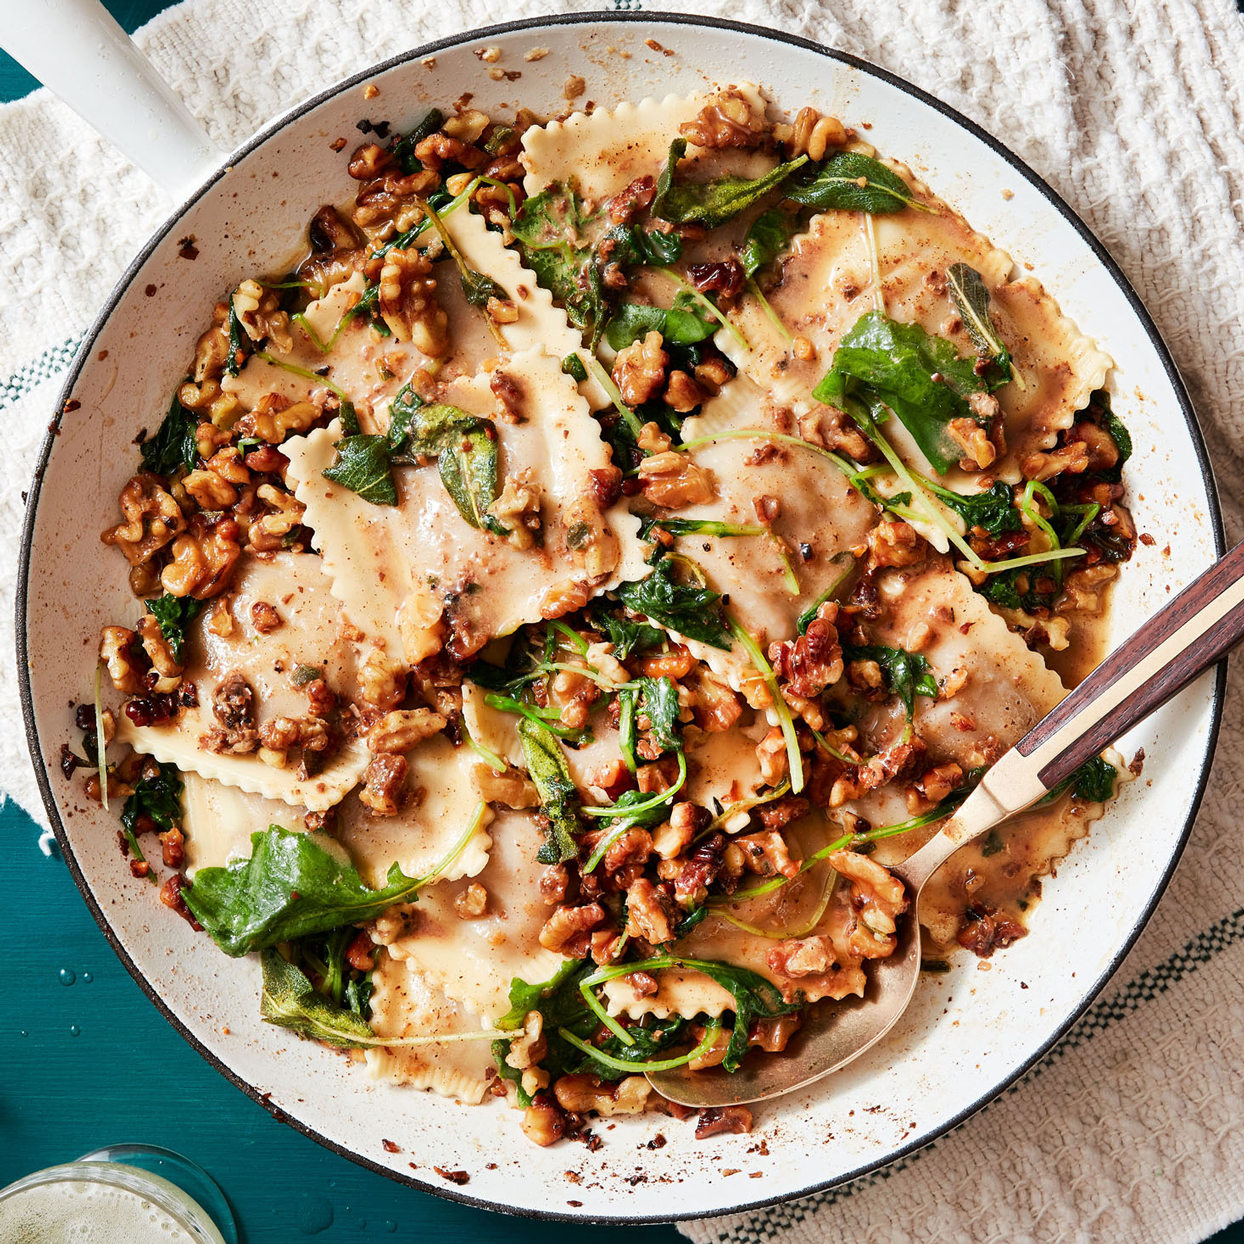 Rachael Ray's Pumpkin-Stuffed Pasta or Gnocchi with Brown Butter & Sage Sauce